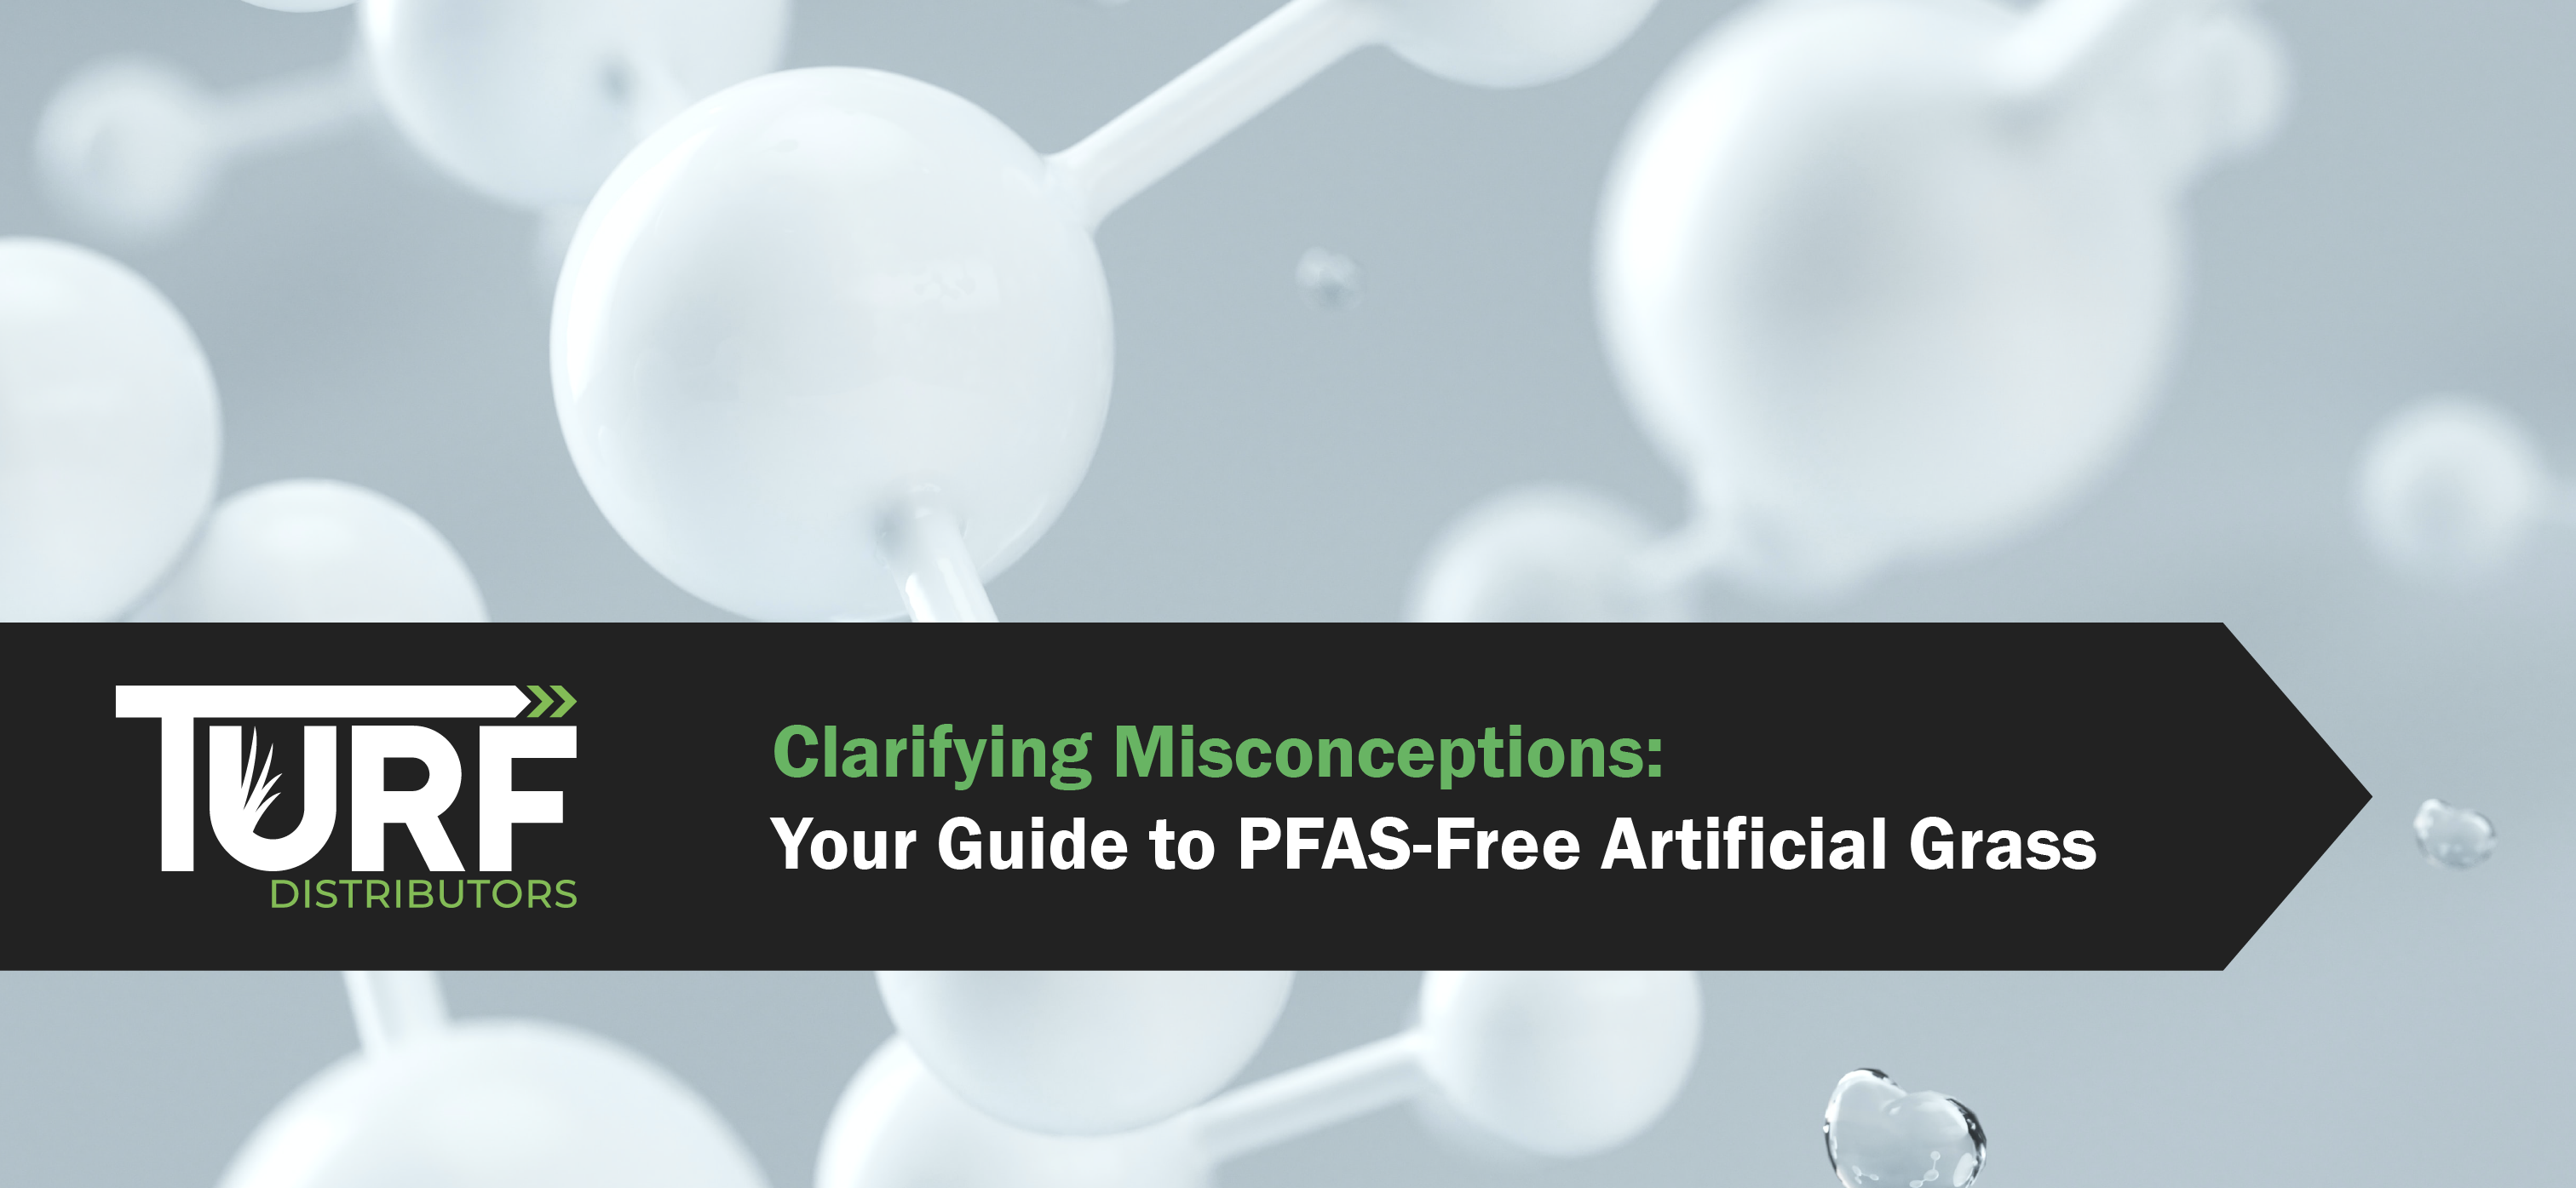 Clarifying Misconceptions: Your Guide to PFAS-Free Artificial Grass